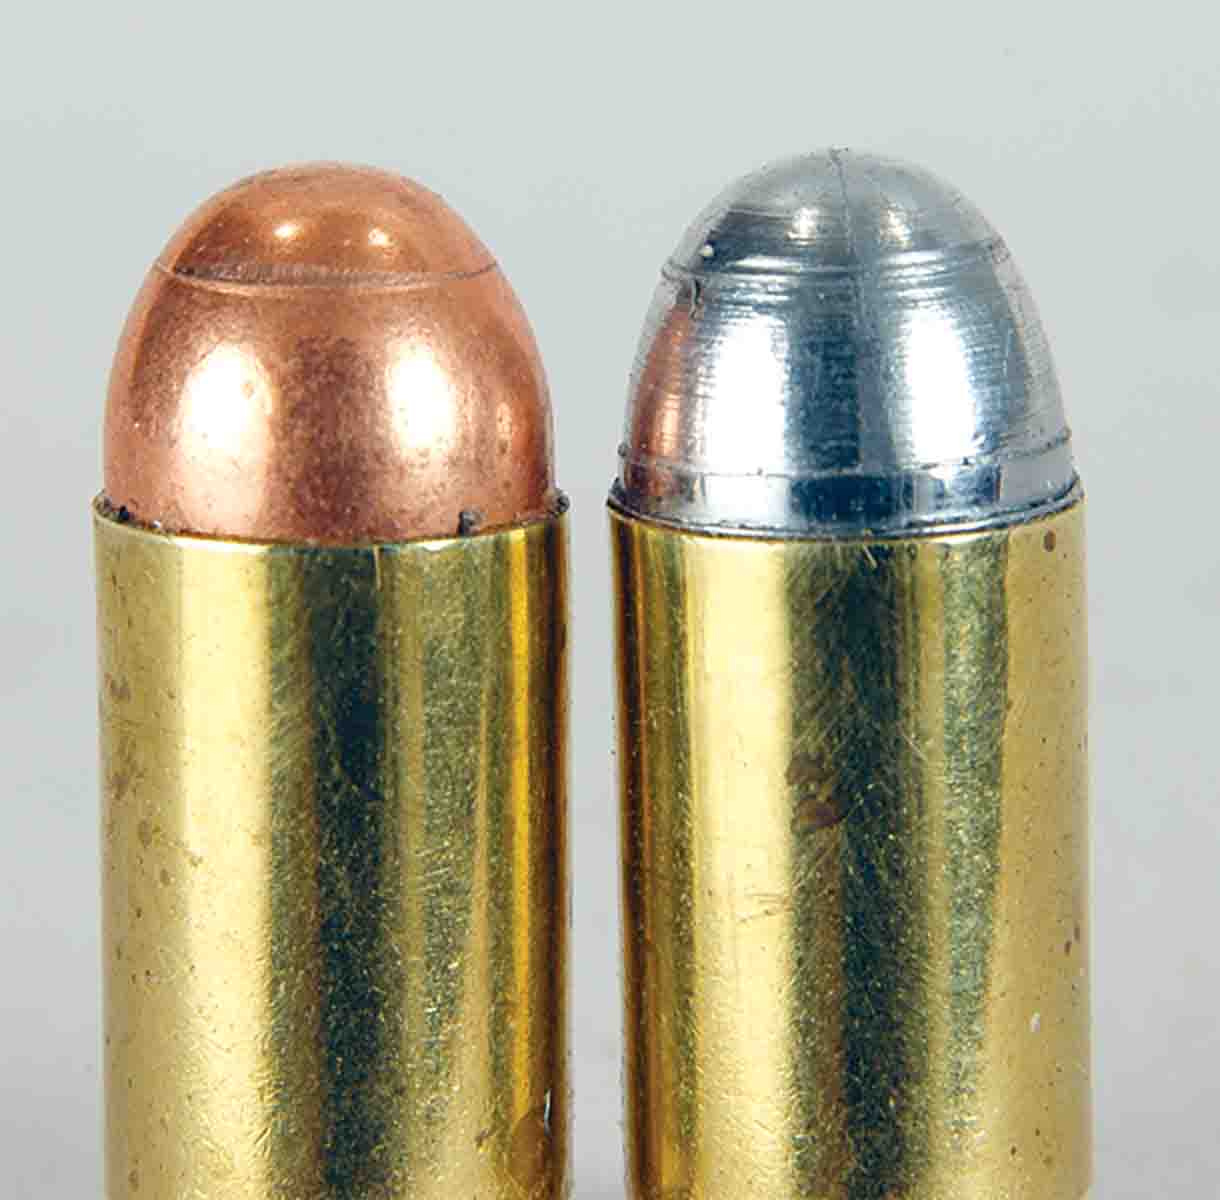 If the tasks of deburring and belling case mouths are performed inadequately, the result will be a cast bullet (right) with the lead peeled away.